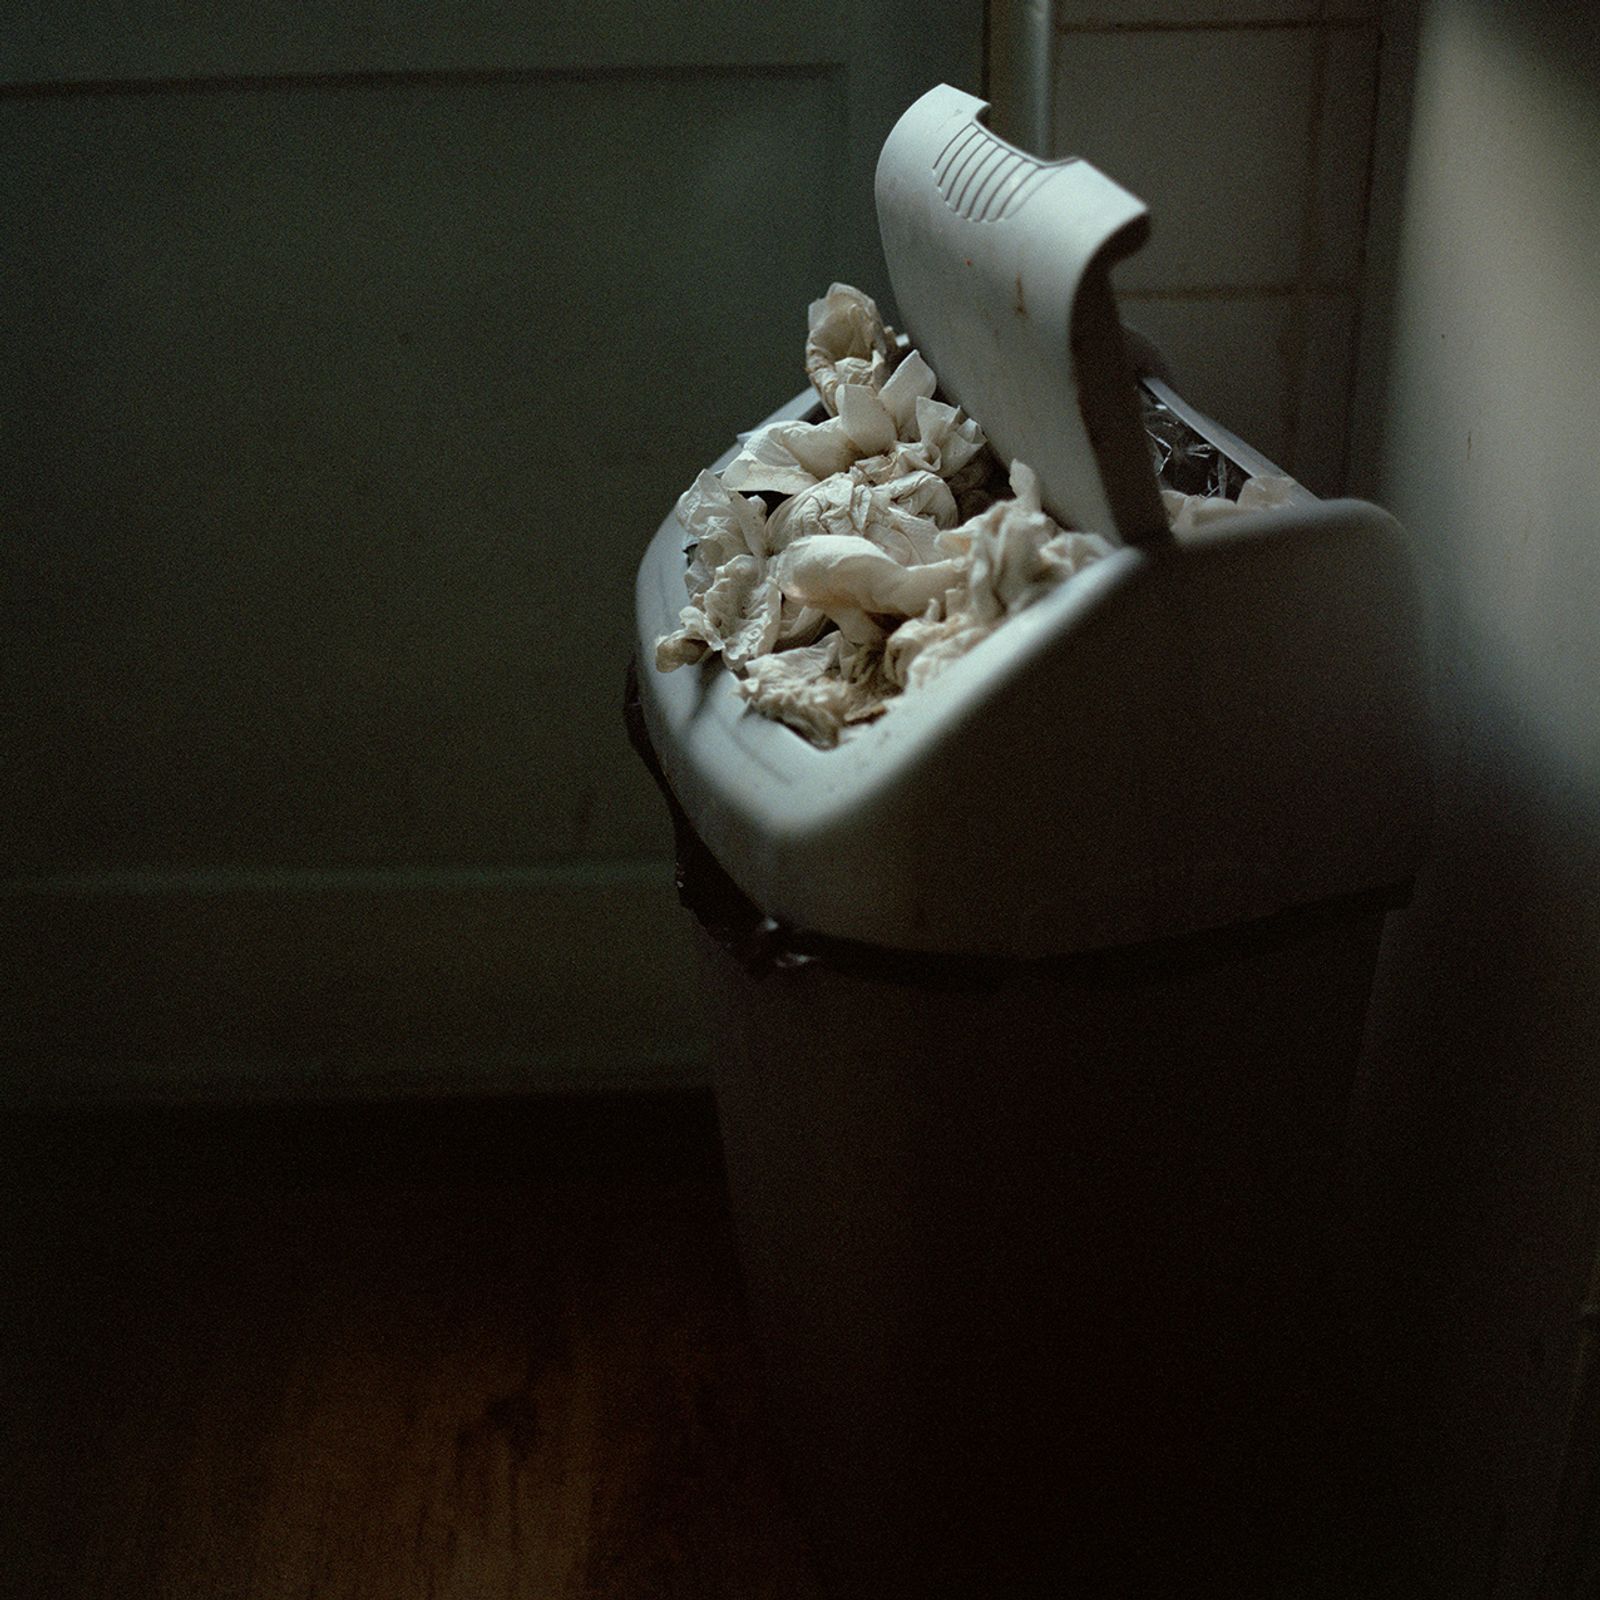 © Clare Gallagher - Image from the The Second Shift photography project